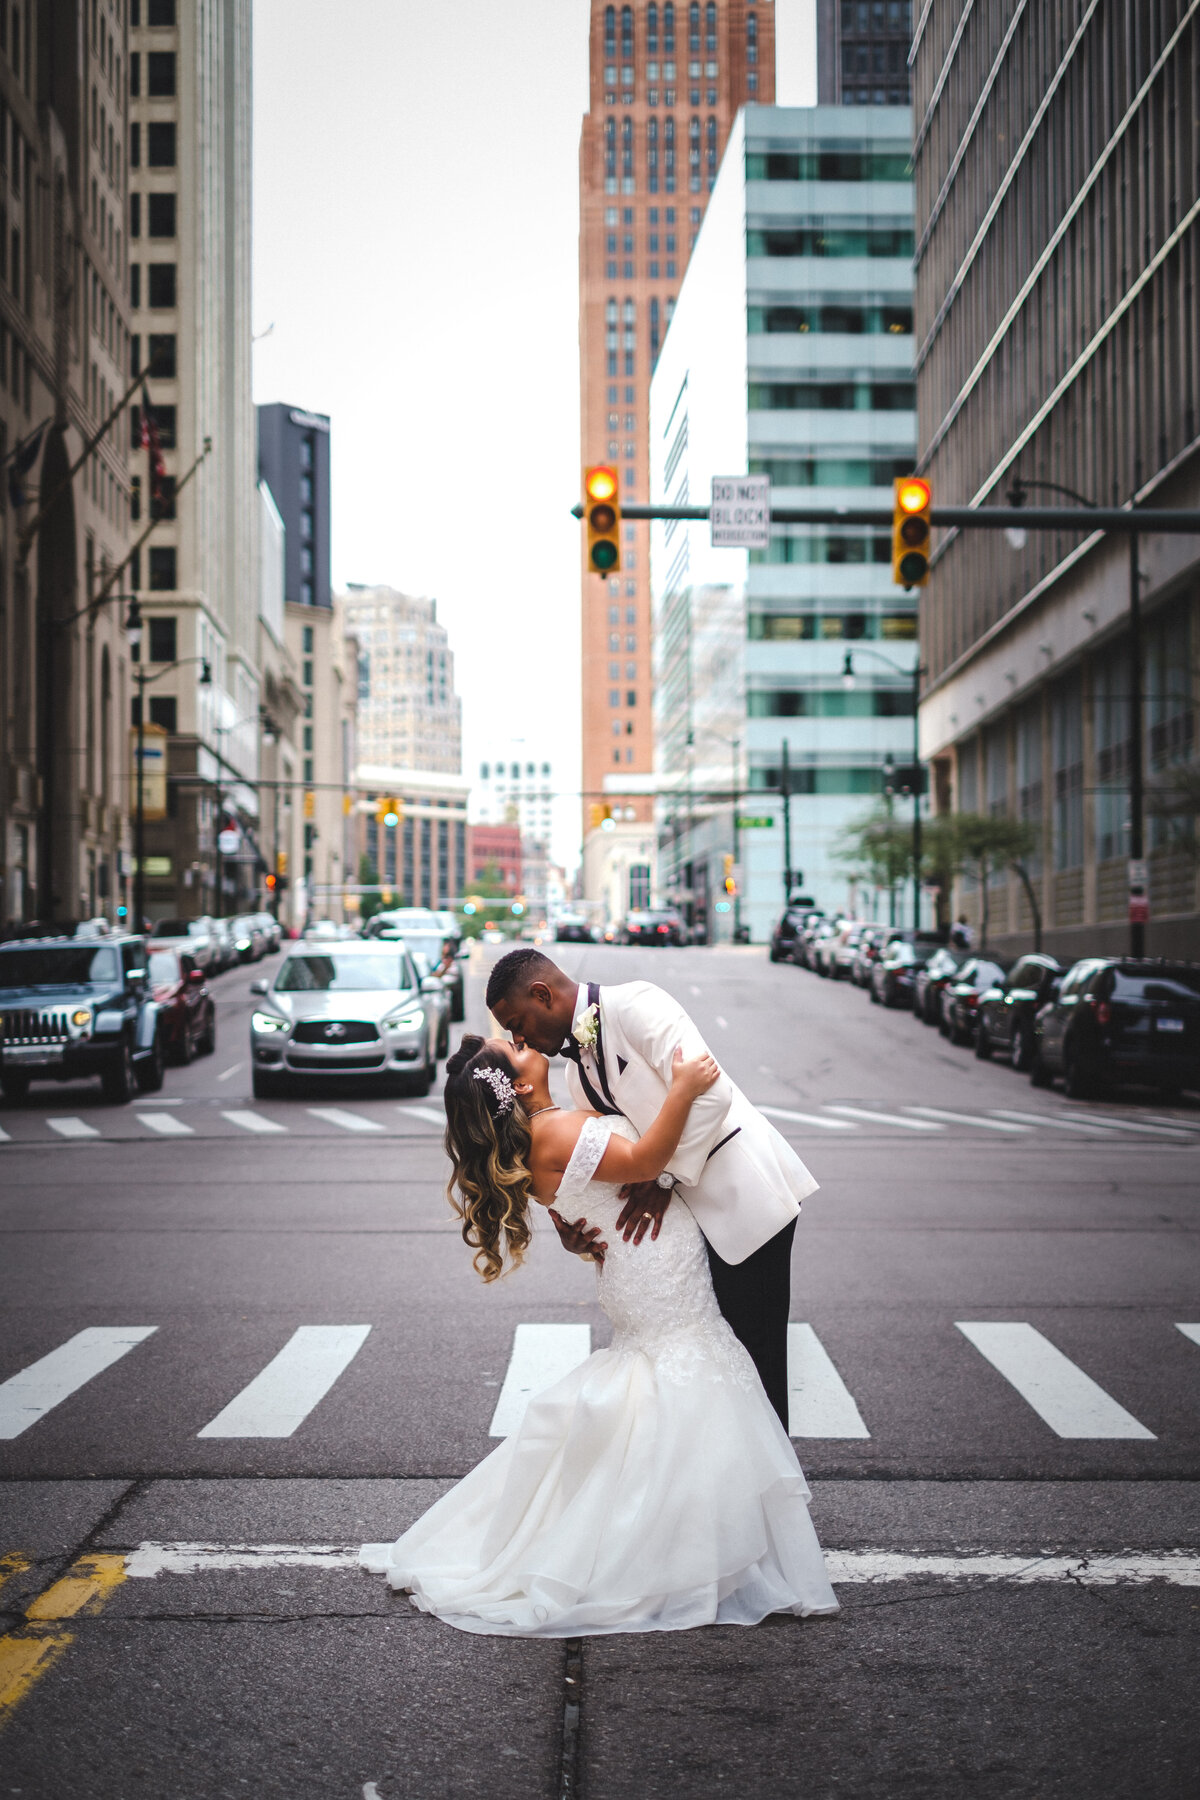 Bride and groom kissing in the street